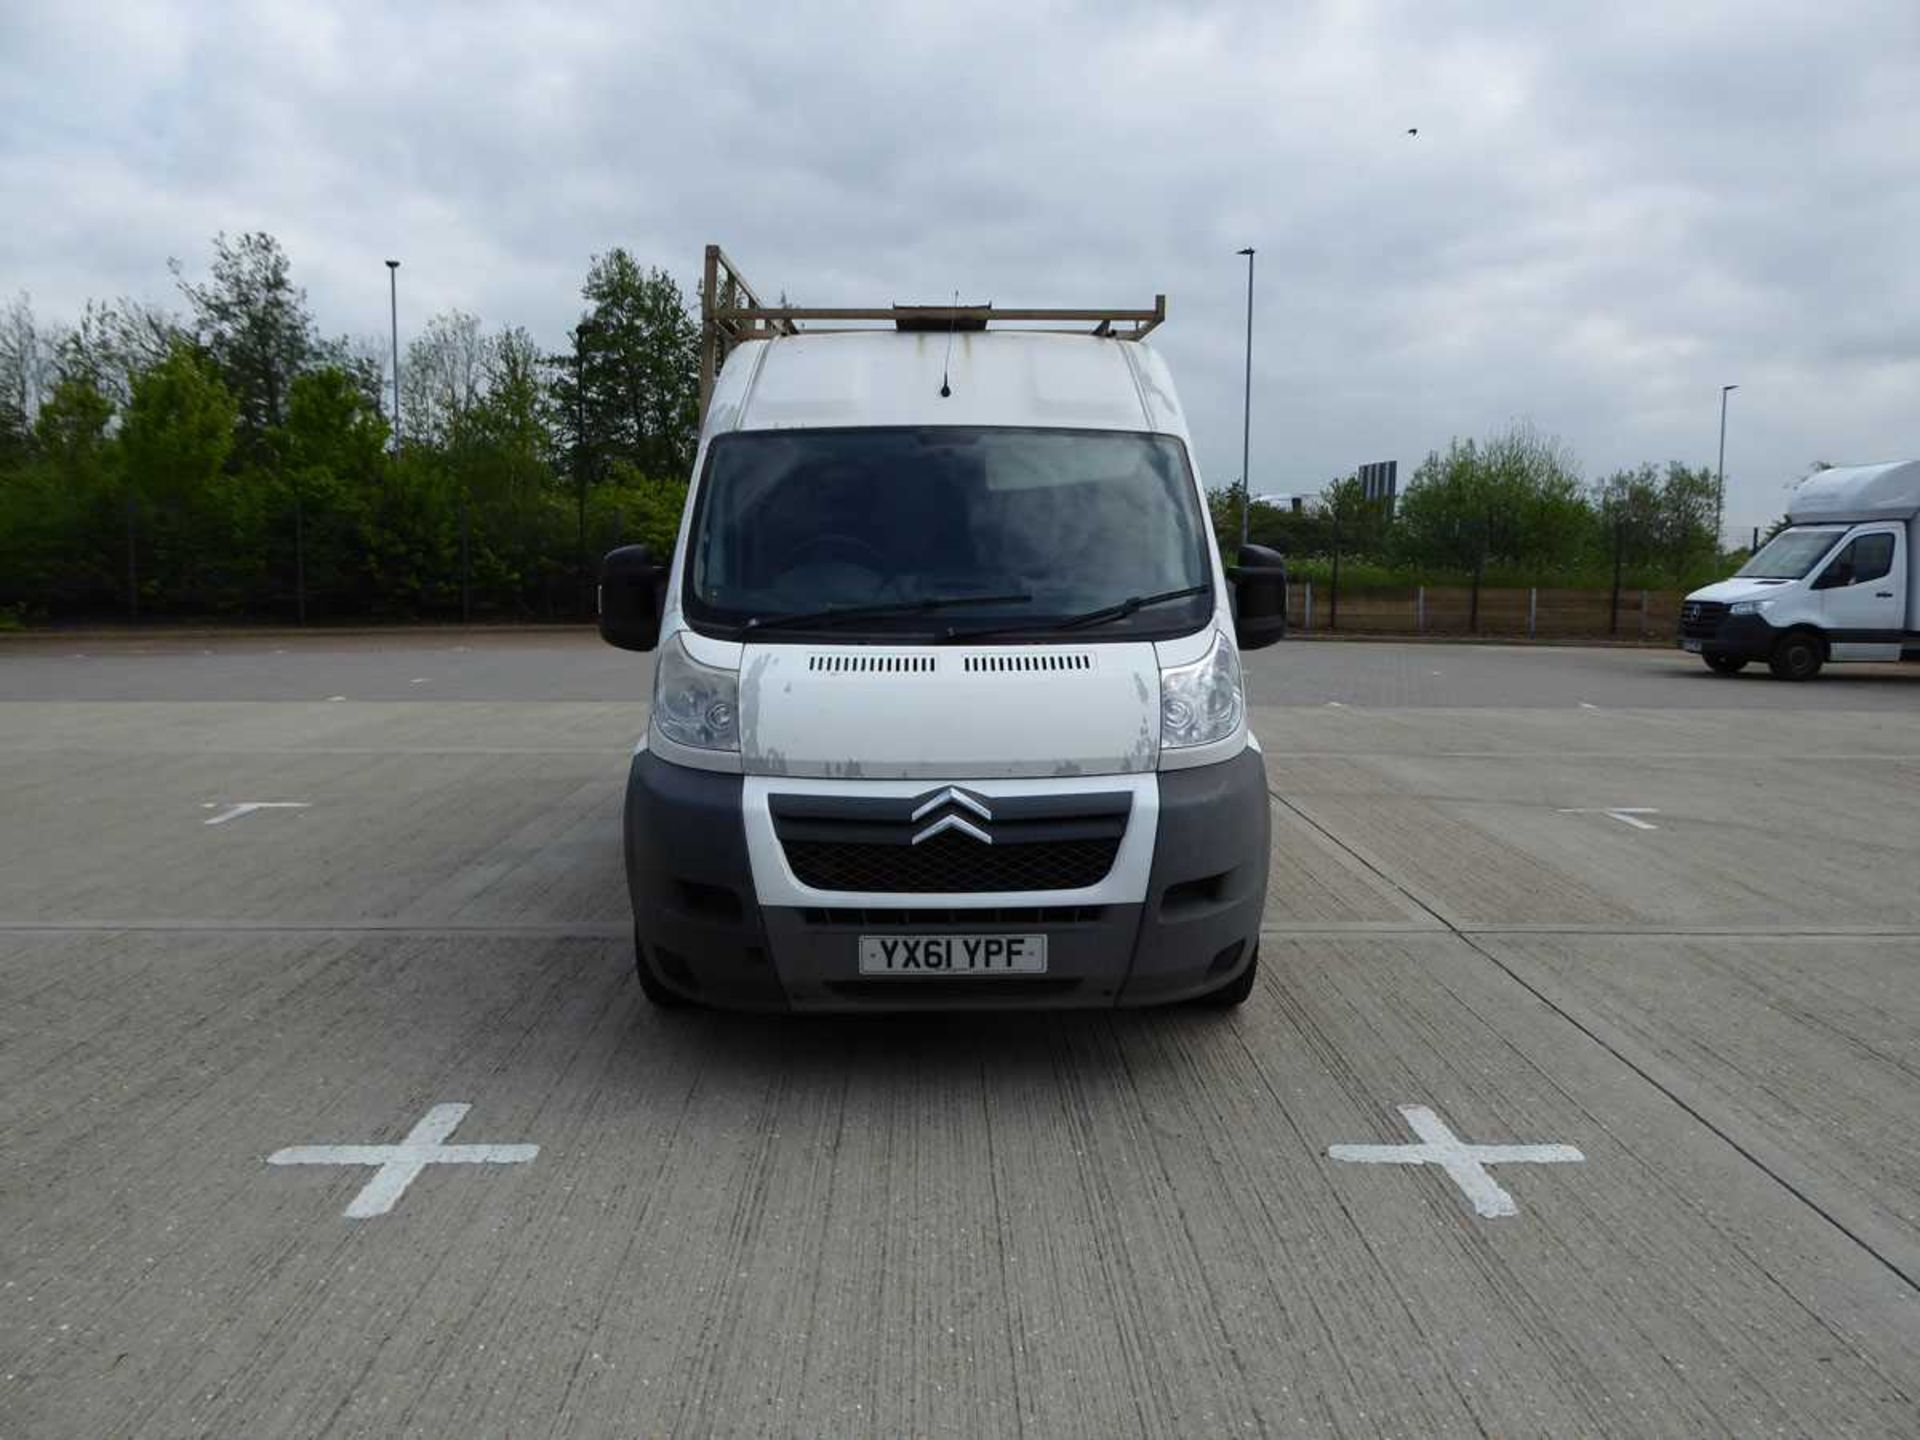 (YX61 YPF) 2011 Citroen Relay 35 L3H2 Enterprise Blue HDi panel van in white with frail, 2198cc - Image 2 of 15